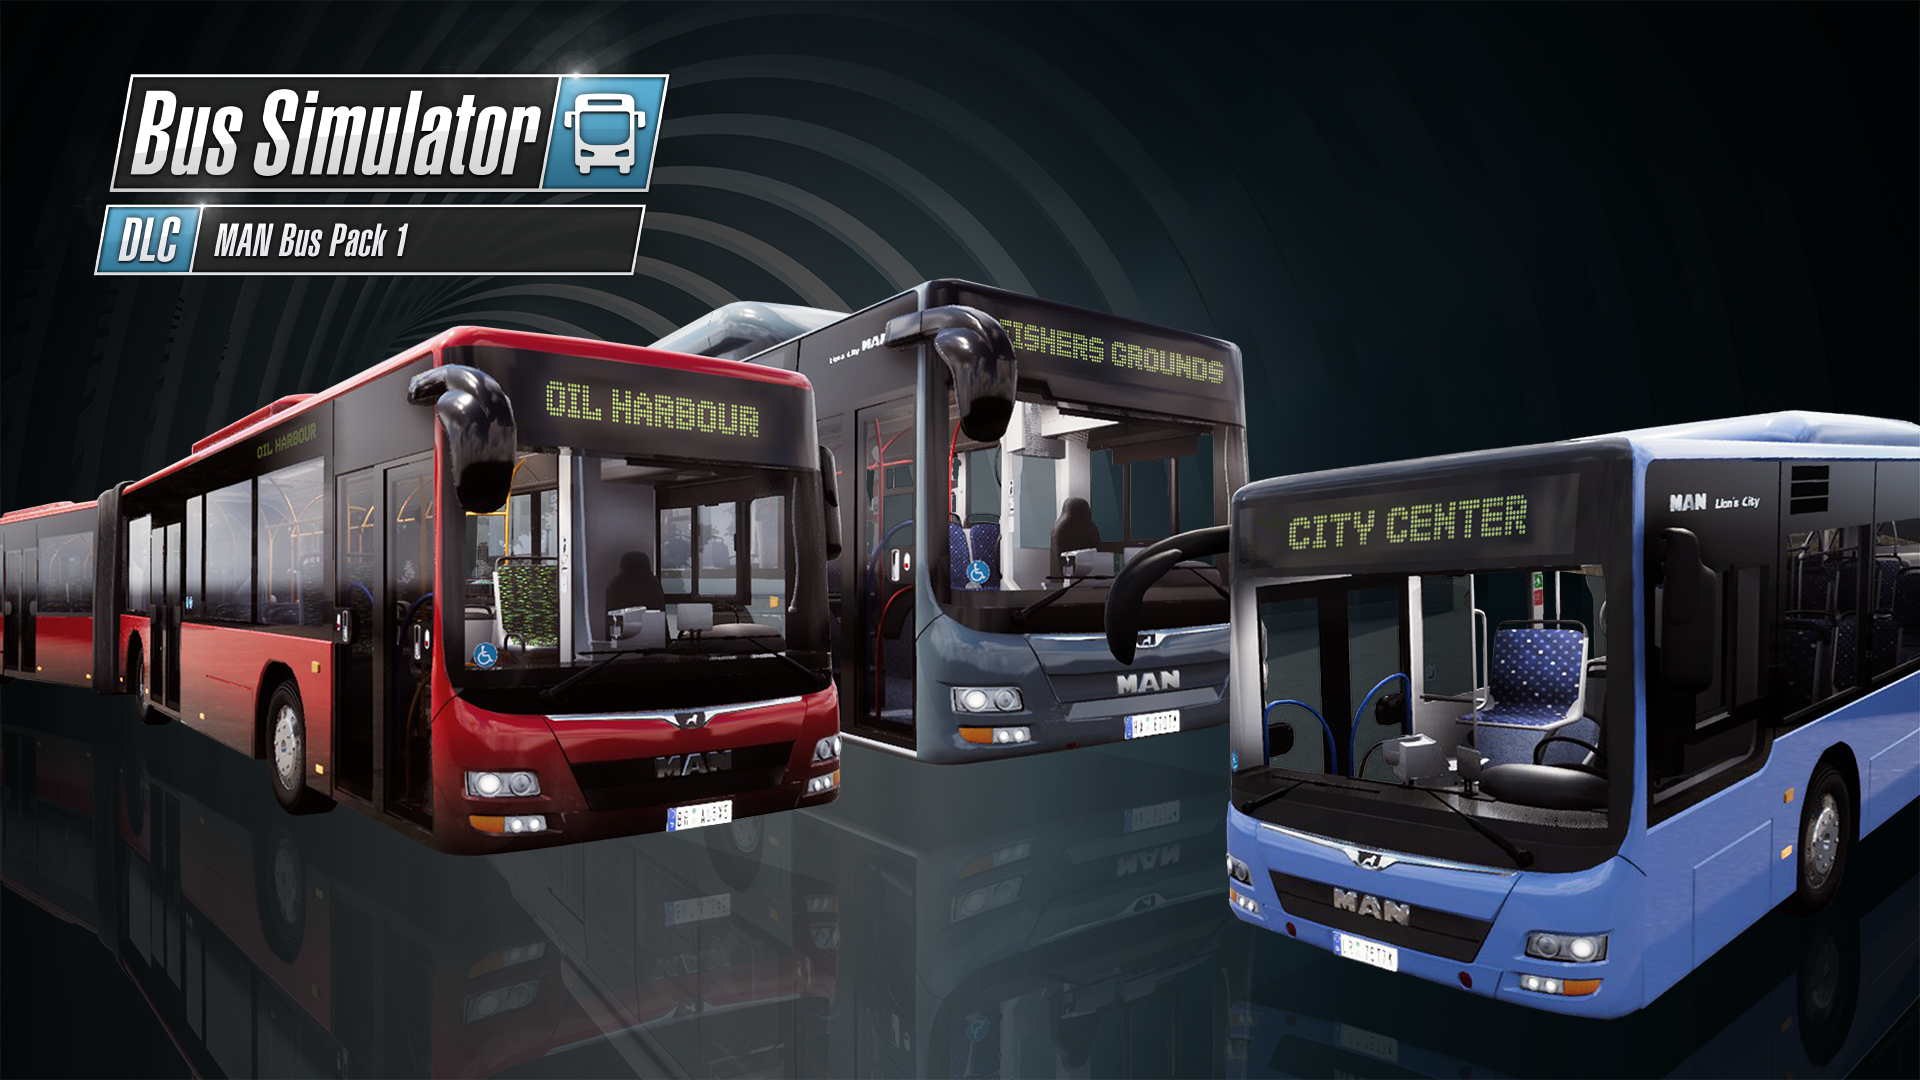 Bus Simulator: MAN Bus Pack 1 DLC Now Out for PS4 and Xbox One